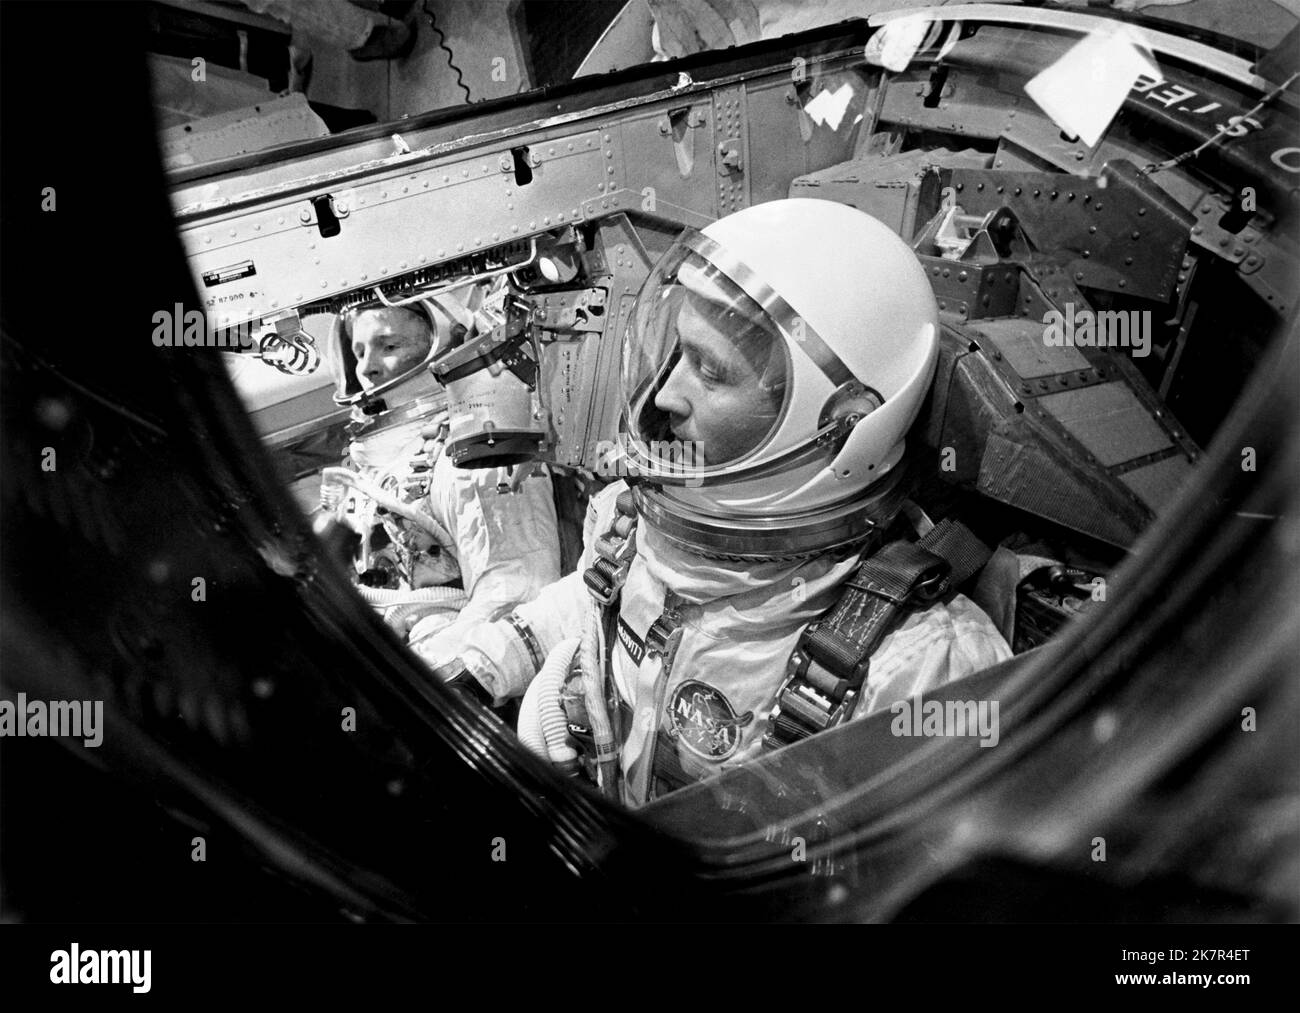 Cape Canaveral, United States. 18th Oct, 2022. NASA Gemini Titan 4 prime crew, astronauts James A. McDivitt, command pilot, foreground, and Edward H. White II, pilot, left, inside the capsule during a dress rehearsal at the Kennedy Space Center, May 21, 1965 in Cape Canaveral, Florida. McDivitt commanded the first spacewalk mission and took part in the first crewed orbital flight of a the lunar module, during Apollo 9, died October 15, 2022 at age 93. Credit: NASA/NASA/Alamy Live News Stock Photo